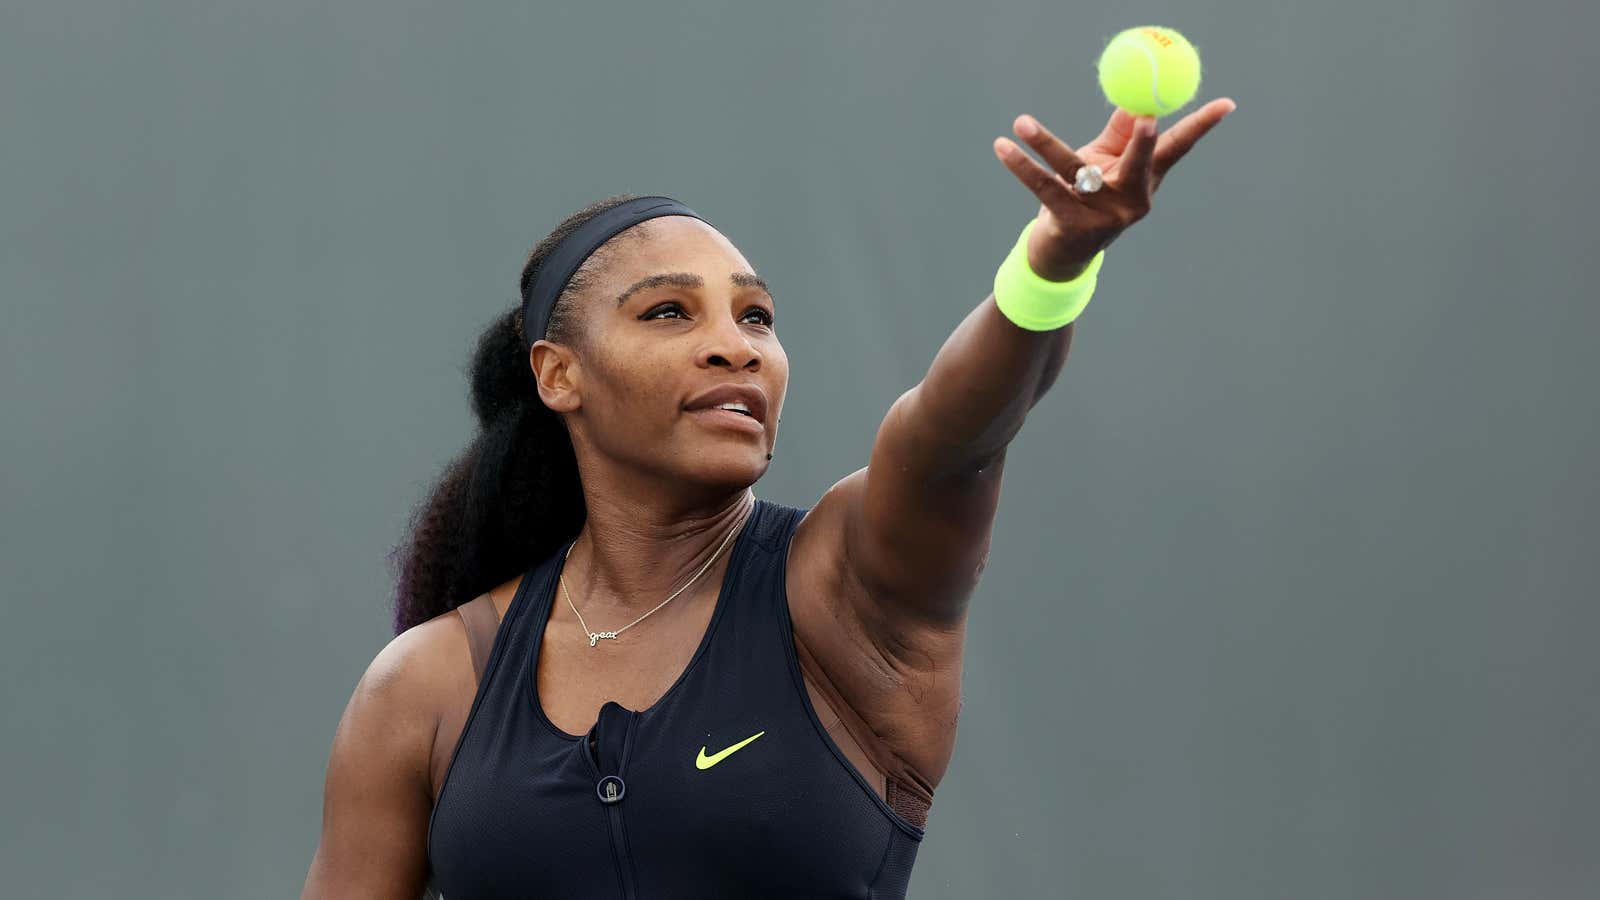 Serena Williams discussed how she&#39;s spending more time looking at companies&#39; decks than tennis balls.